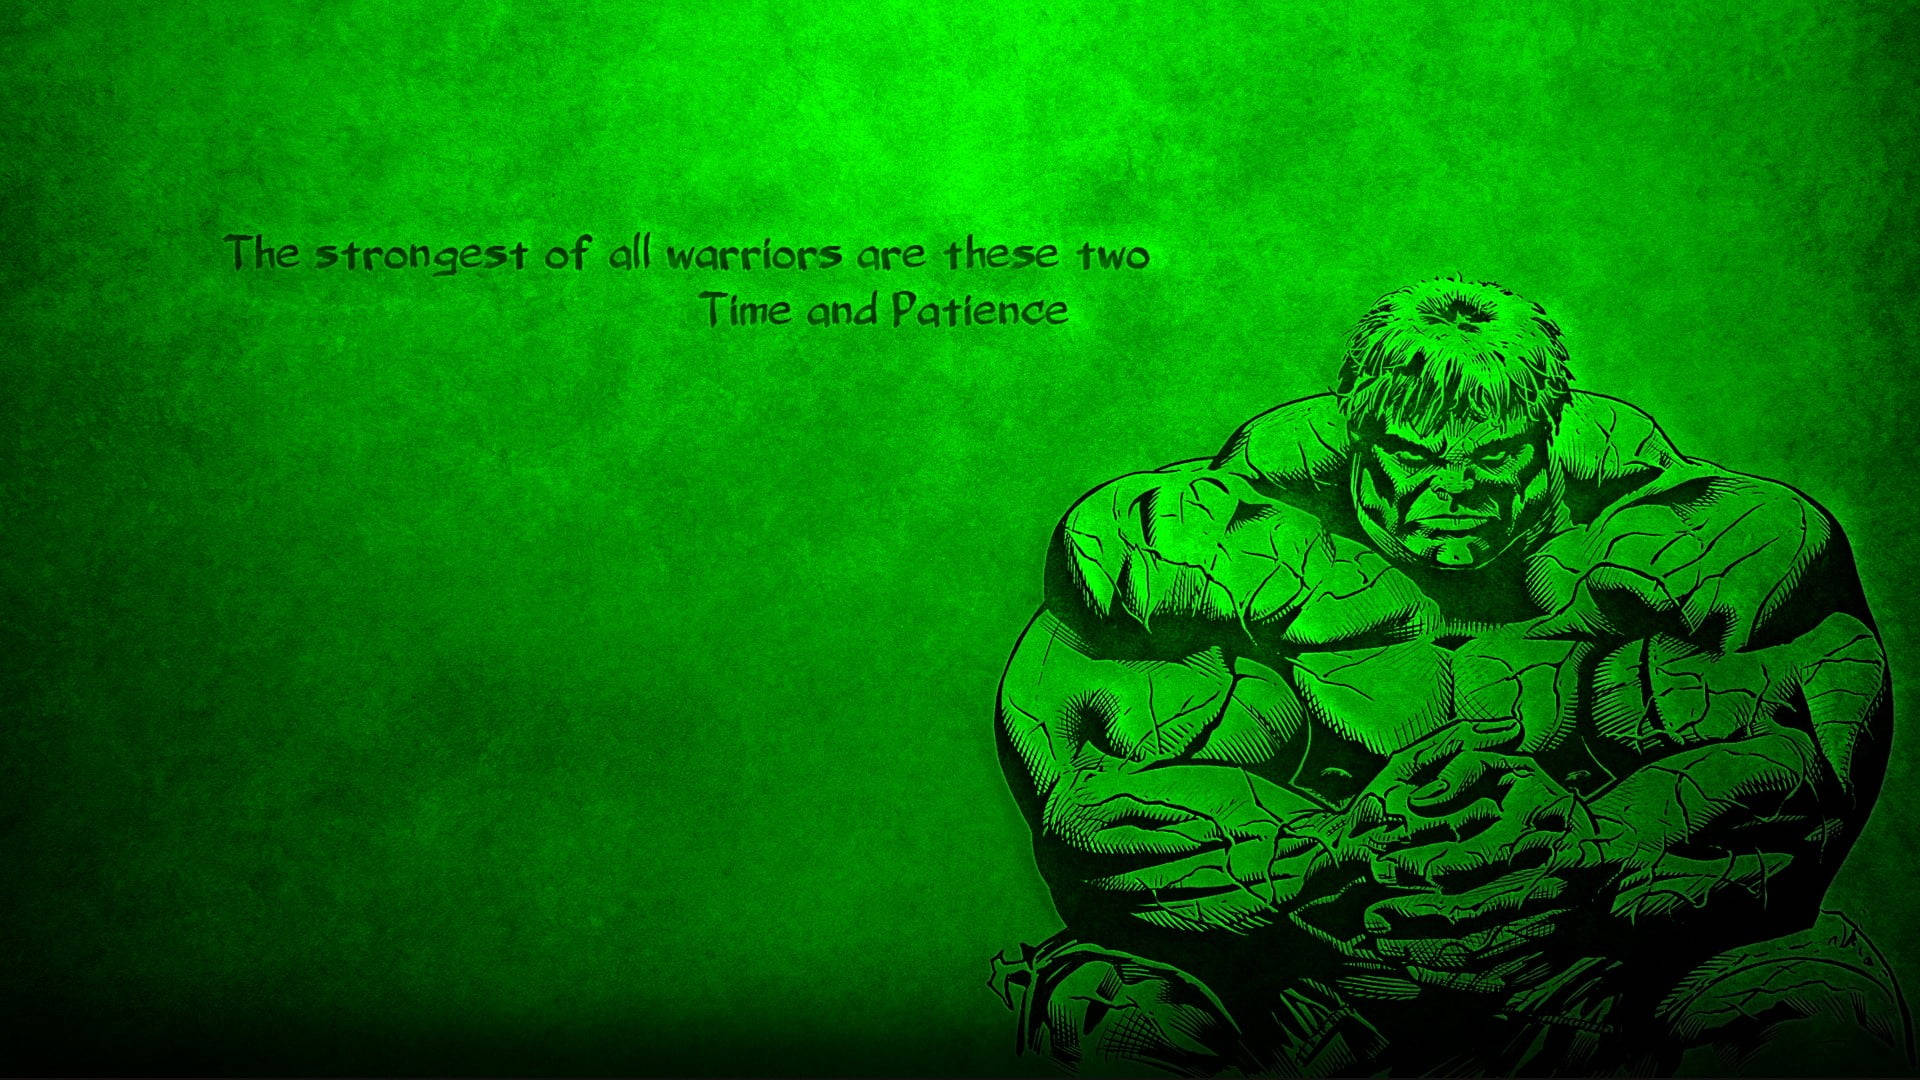 Inspirational Quote on Plain Green Background Wallpaper